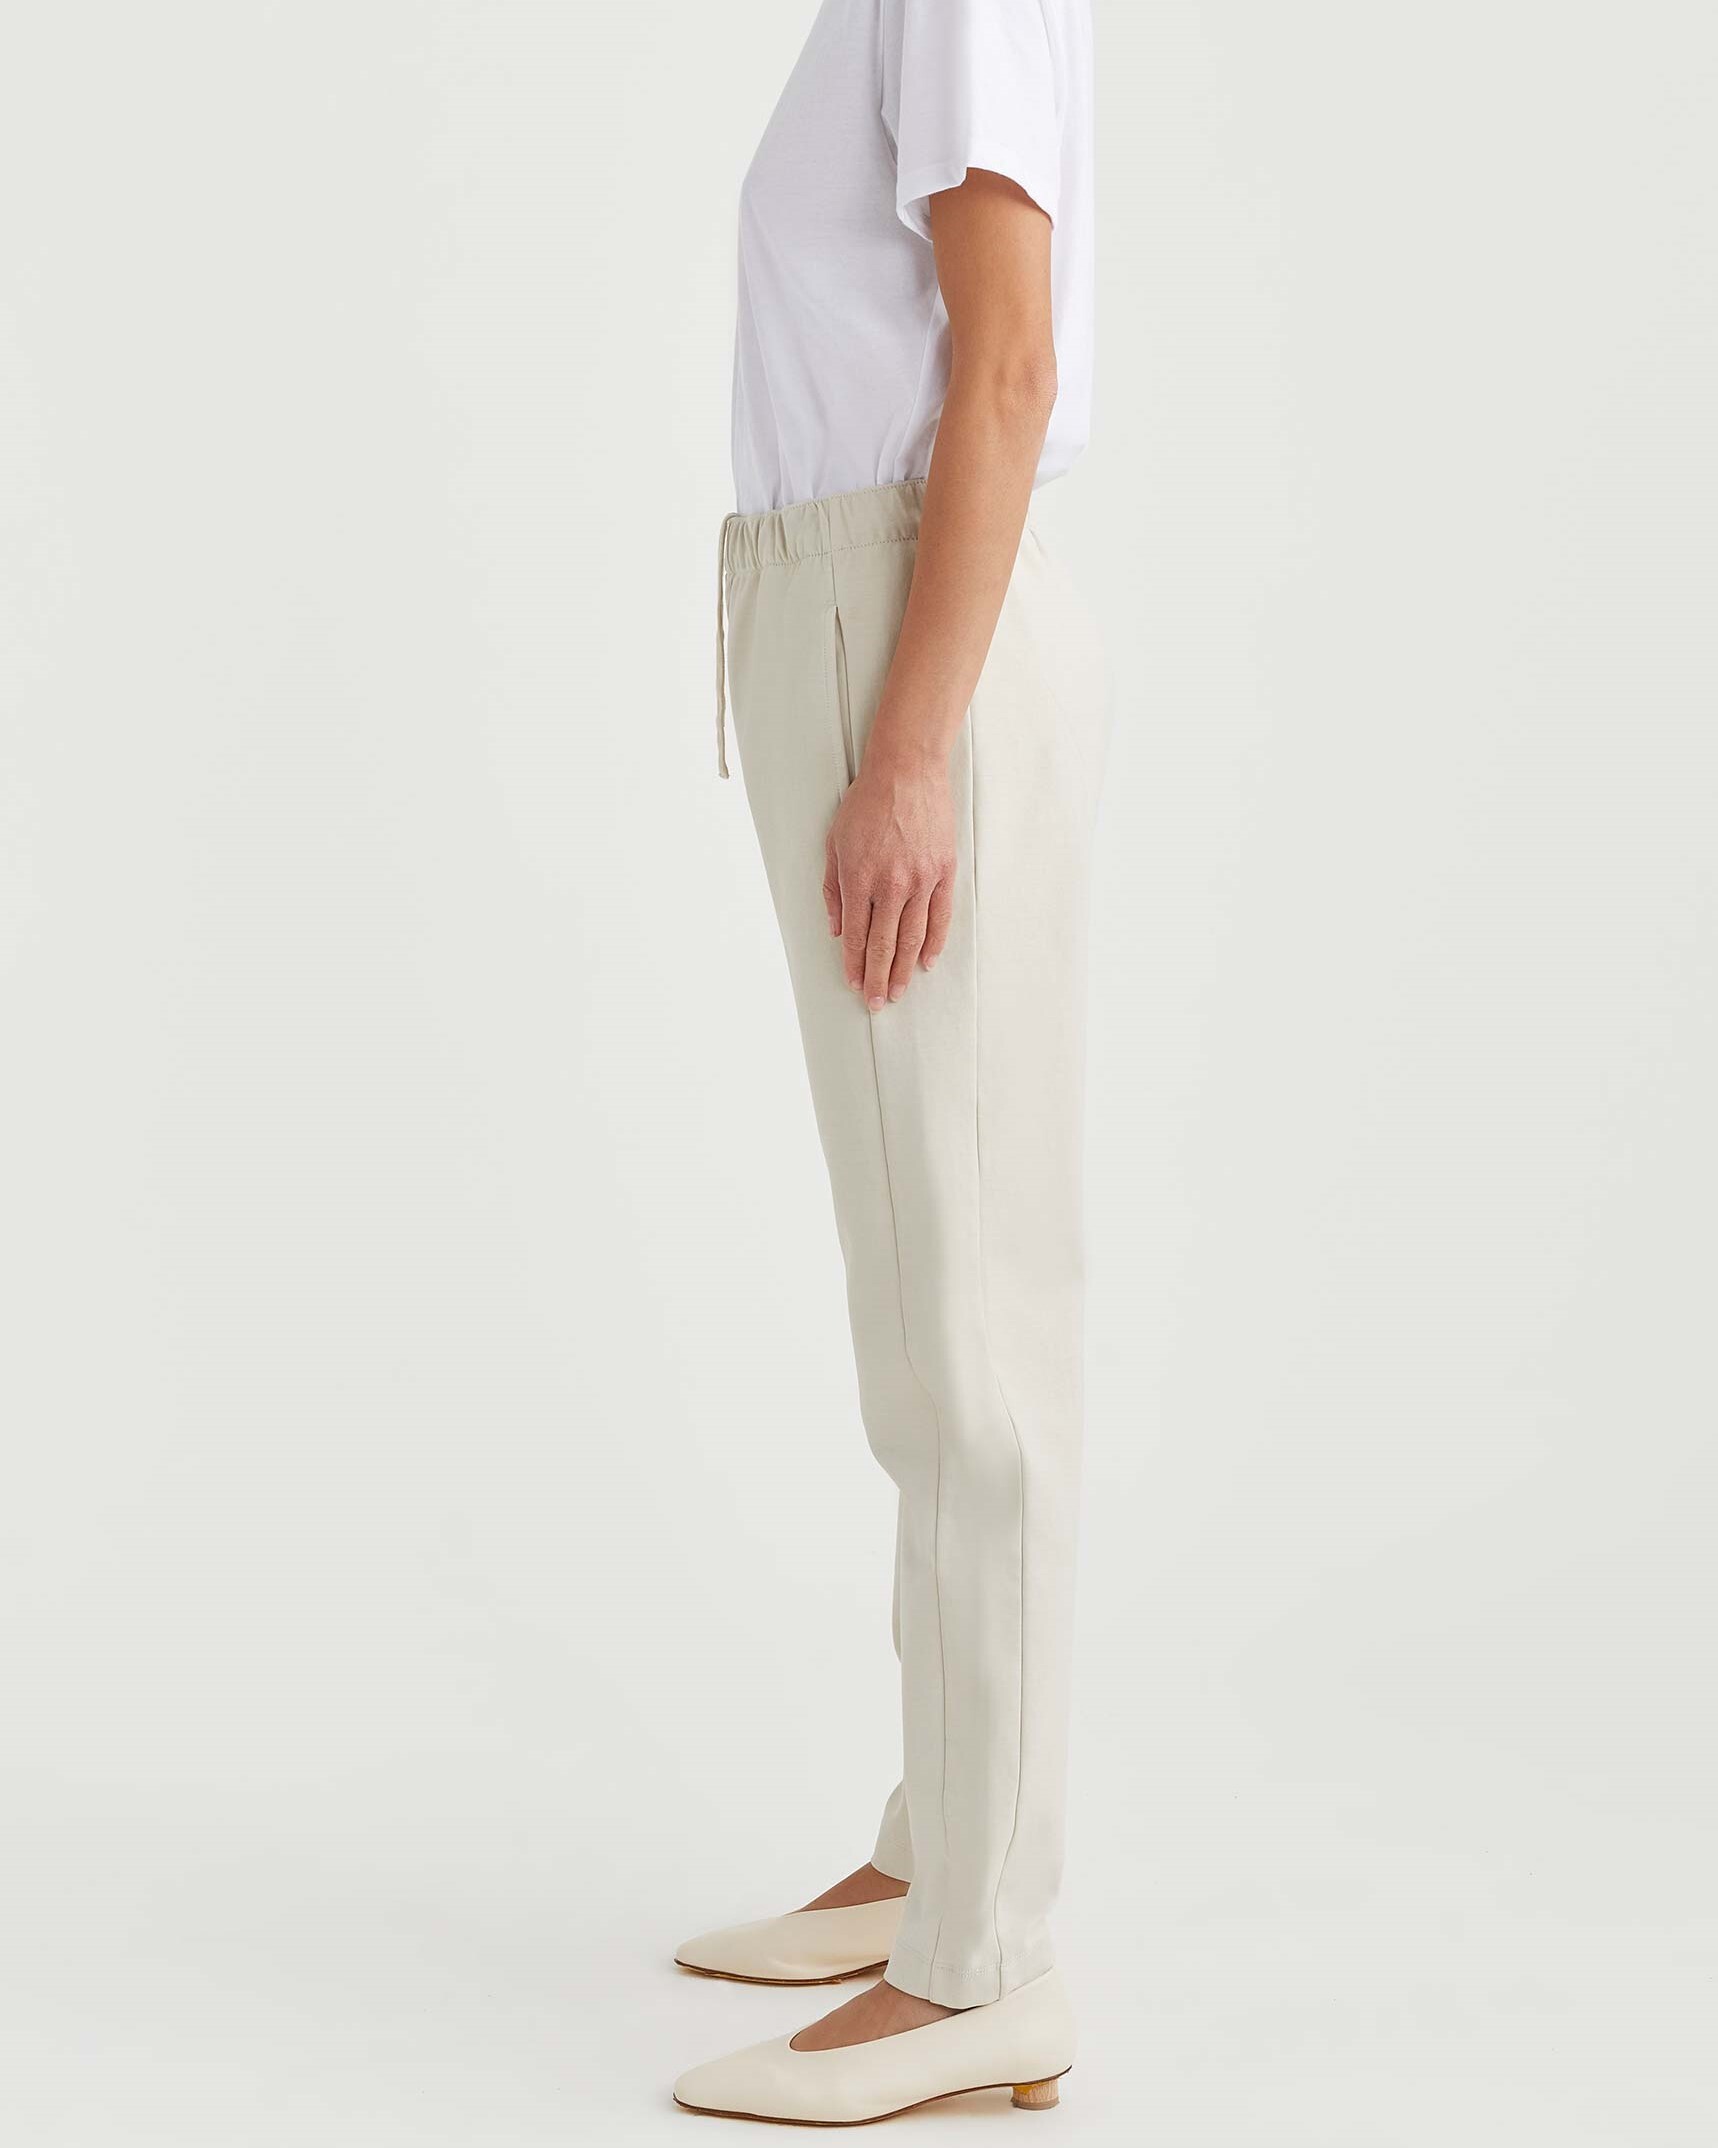 BYRON PANT (TEQUILA)- JAC + JACK AUTUMN WINTER 21 Boxing Day Sale